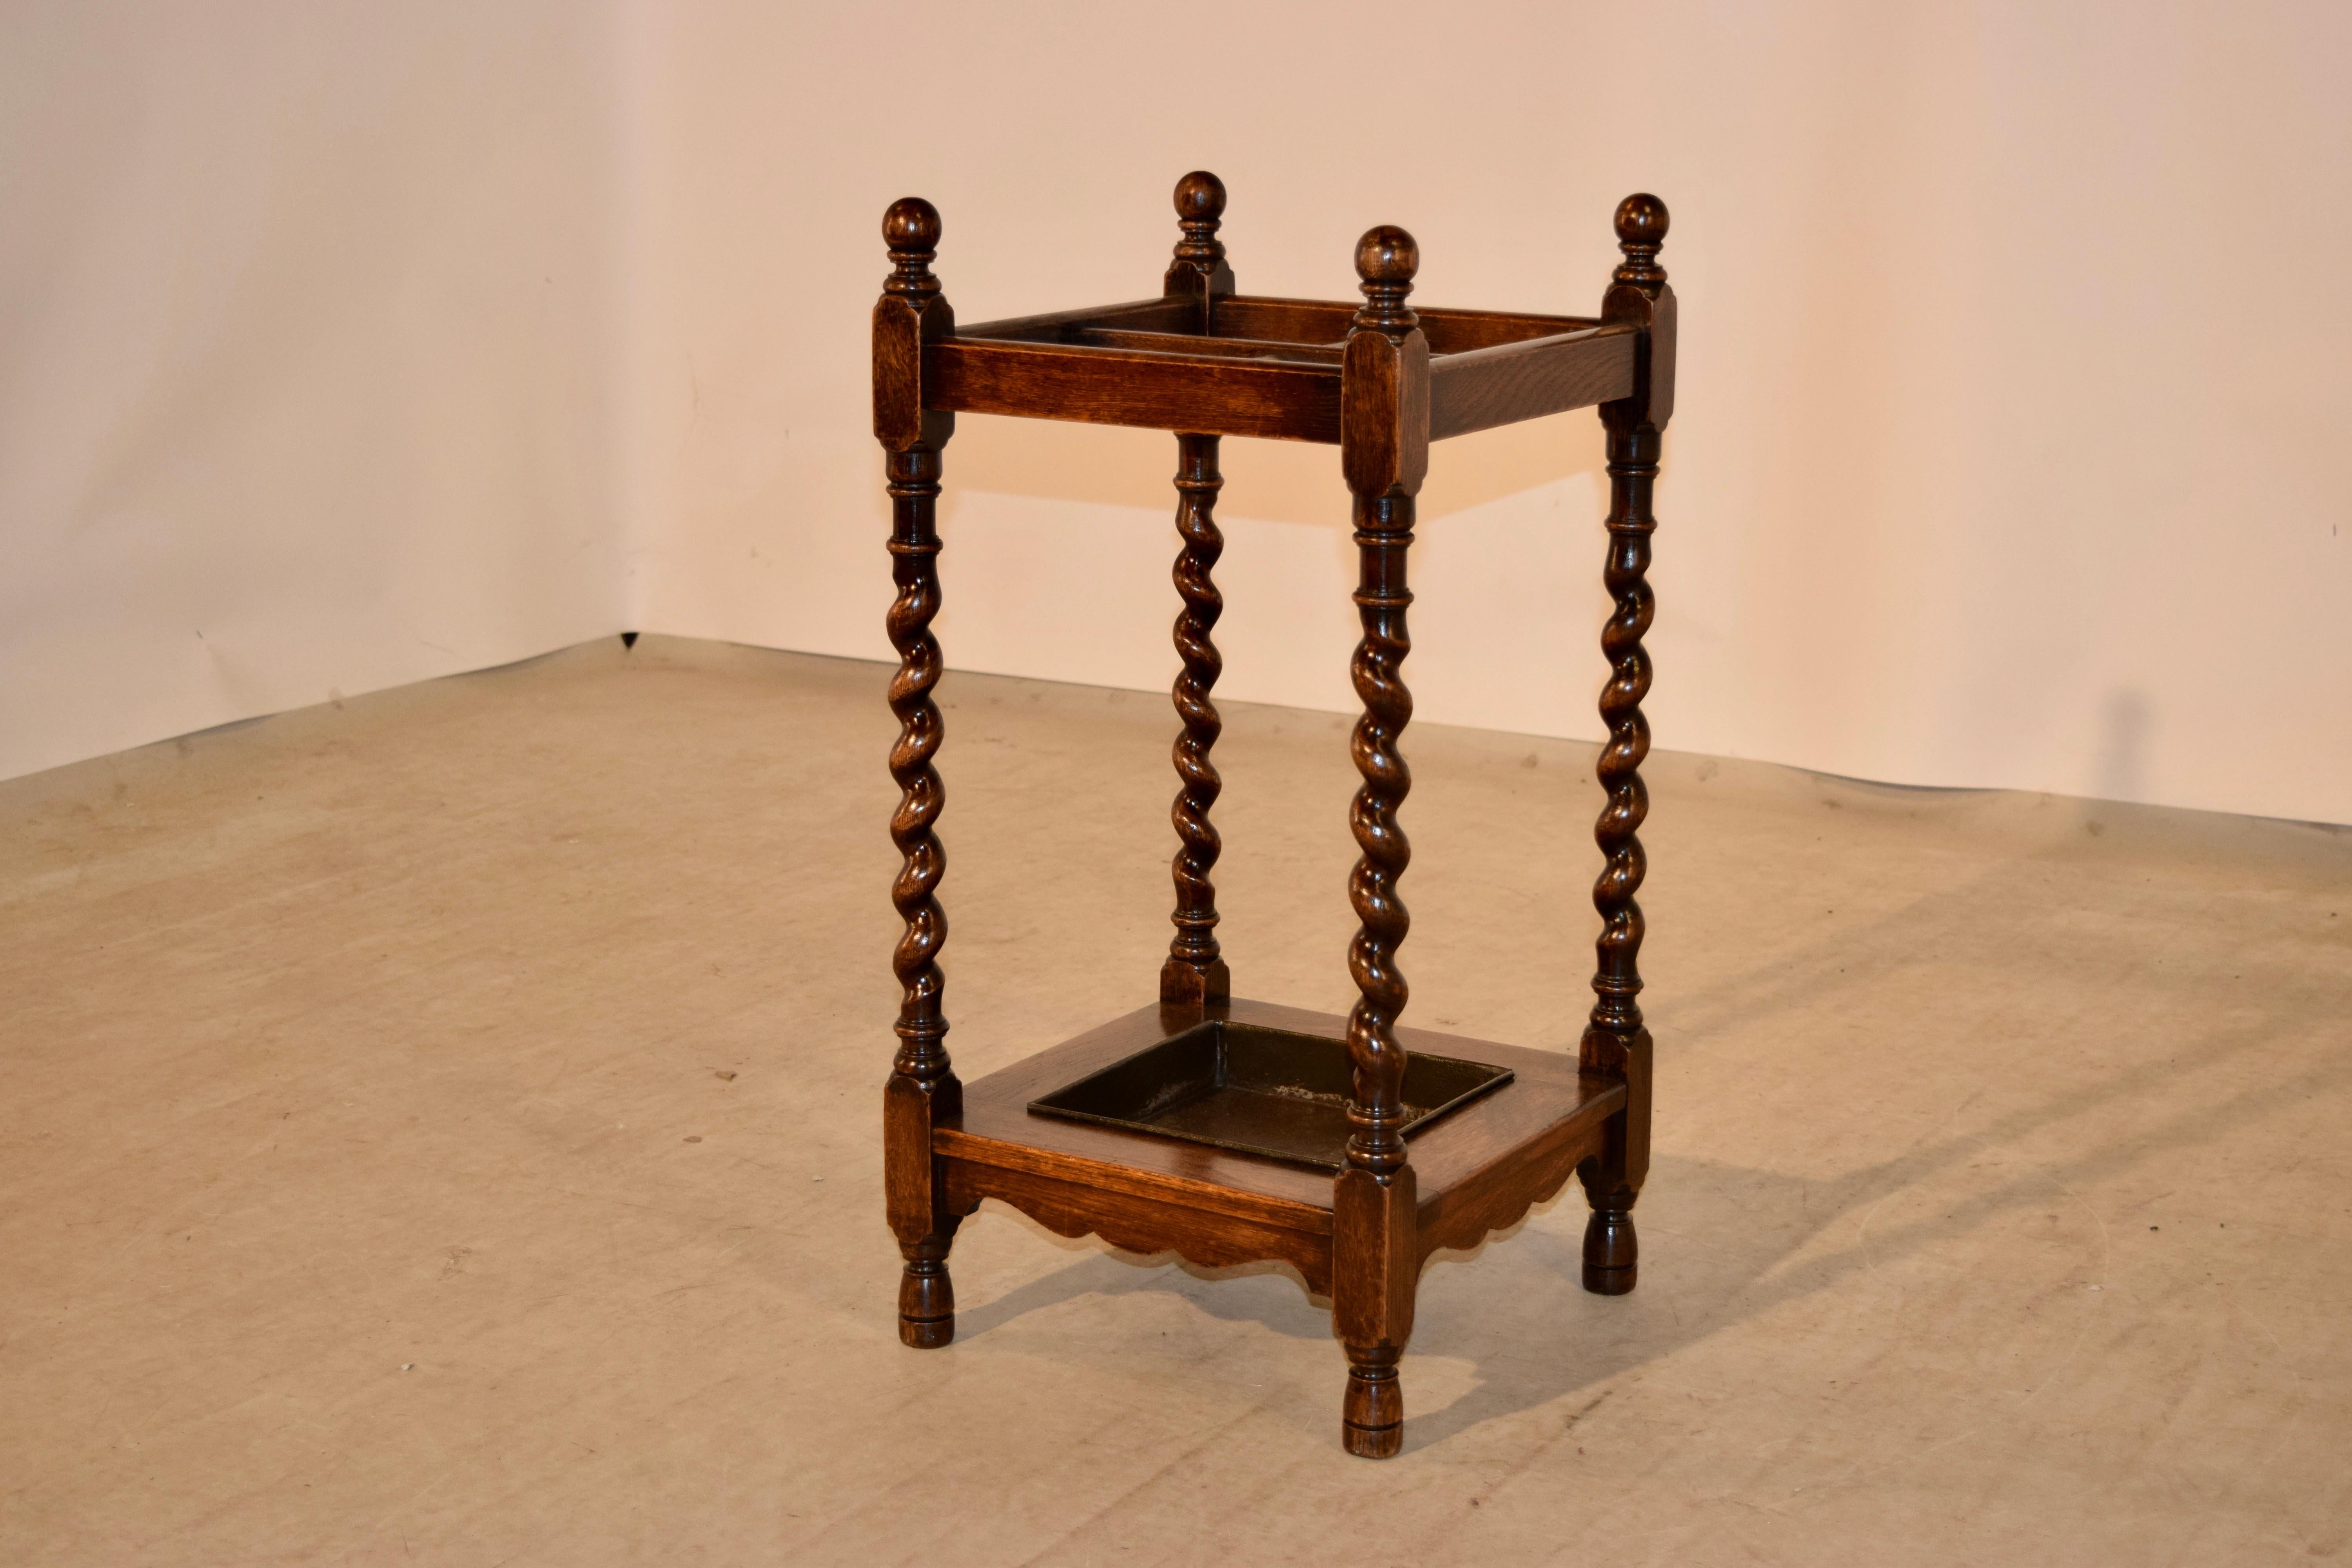 Late 19th century English oak umbrella stand with hand-turned barley twist legs, joined at the top by simple rails, with separations for umbrellas and canes, and joined at the bottom by scalloped rails which hold a painted metal drip tray. Raised on